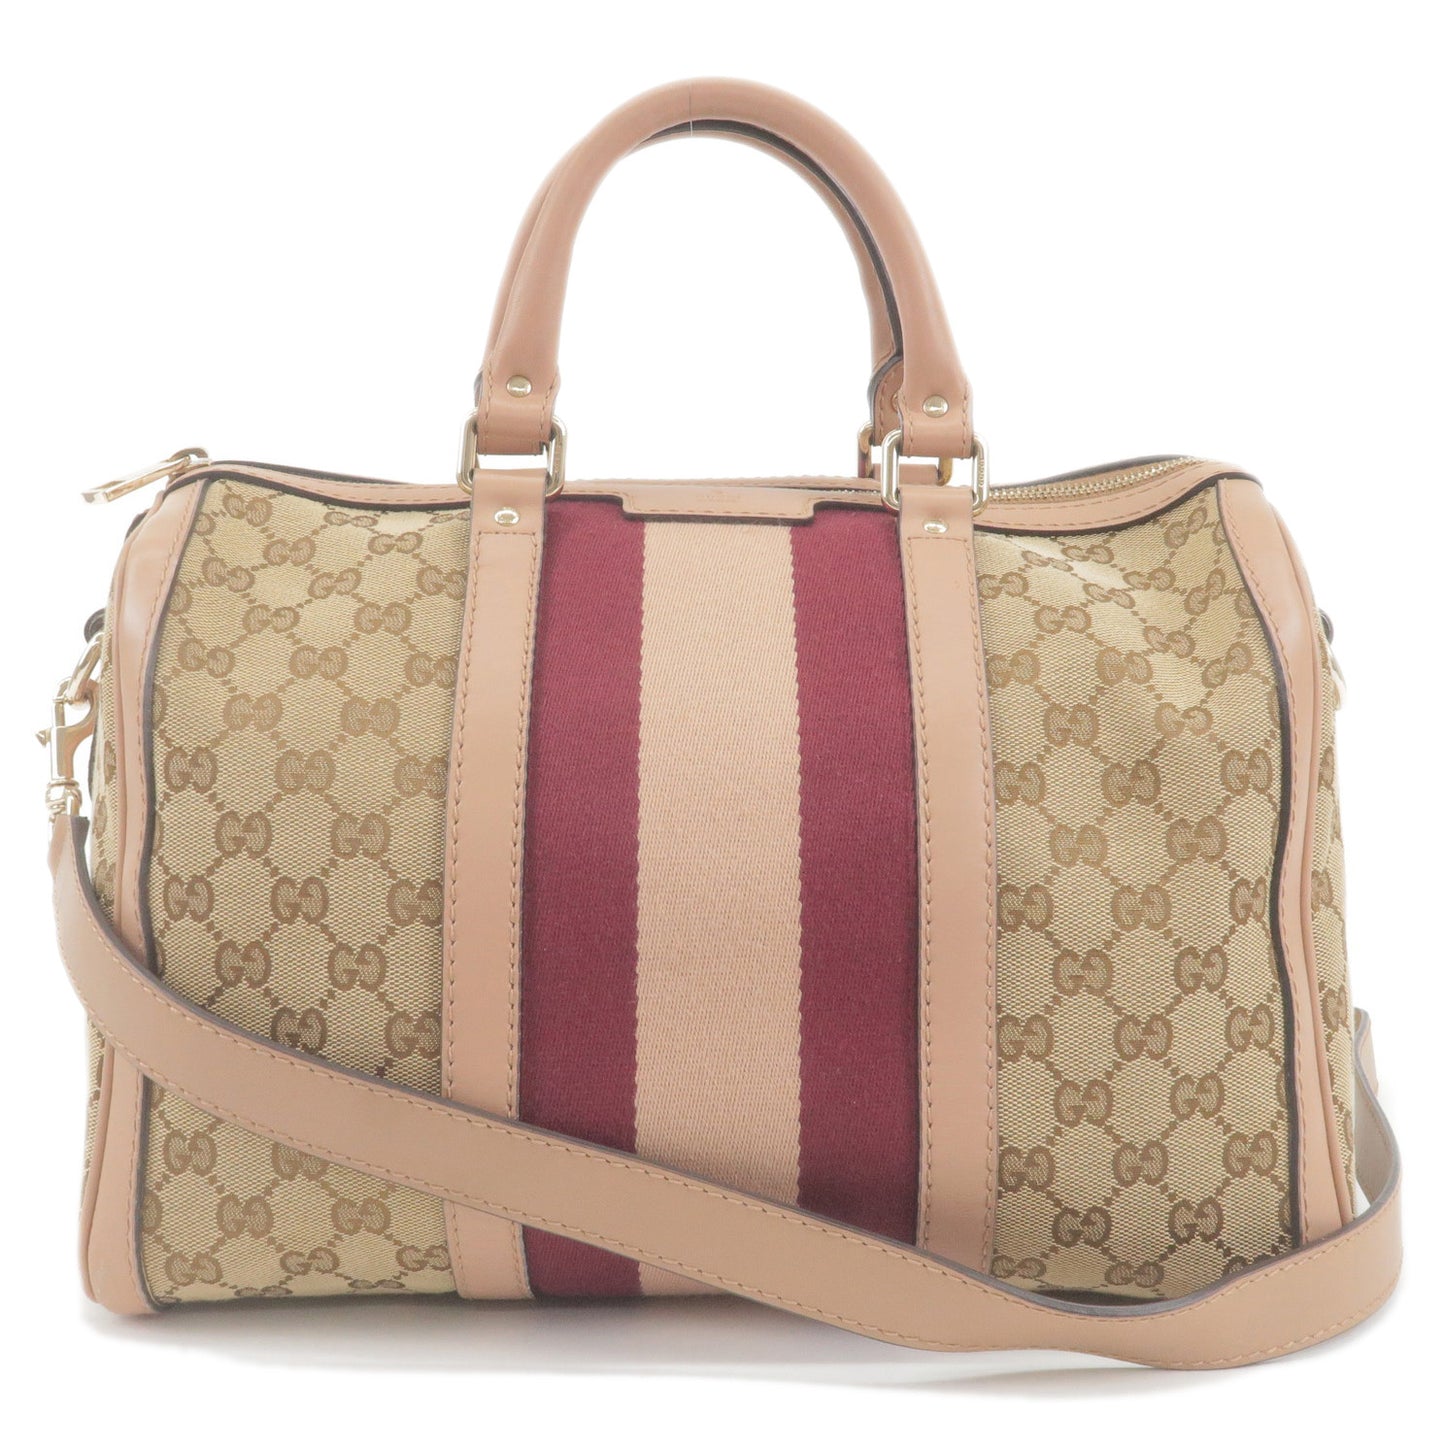 GUCCI-Sherry-Line-GG-Canvas-Leather-Boston-Bag-Pink-Beige-247205